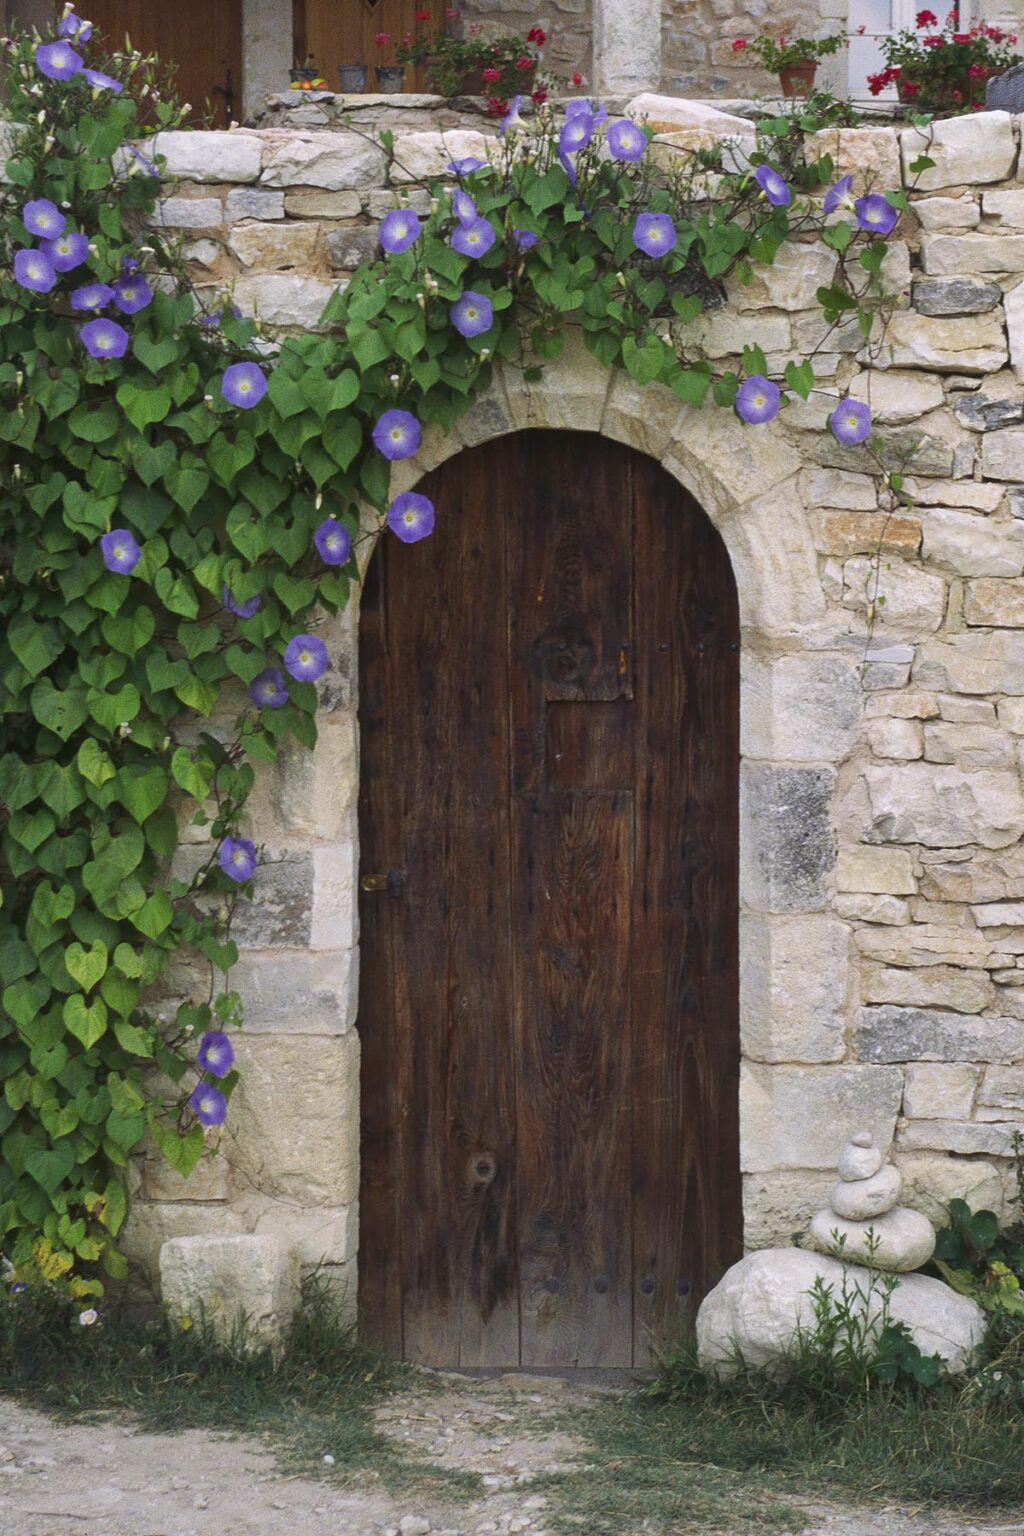 Purple morning glory flowers frame a door of a quaint house in the Village of ROUSSILLON - PROVENCE, FRANCE